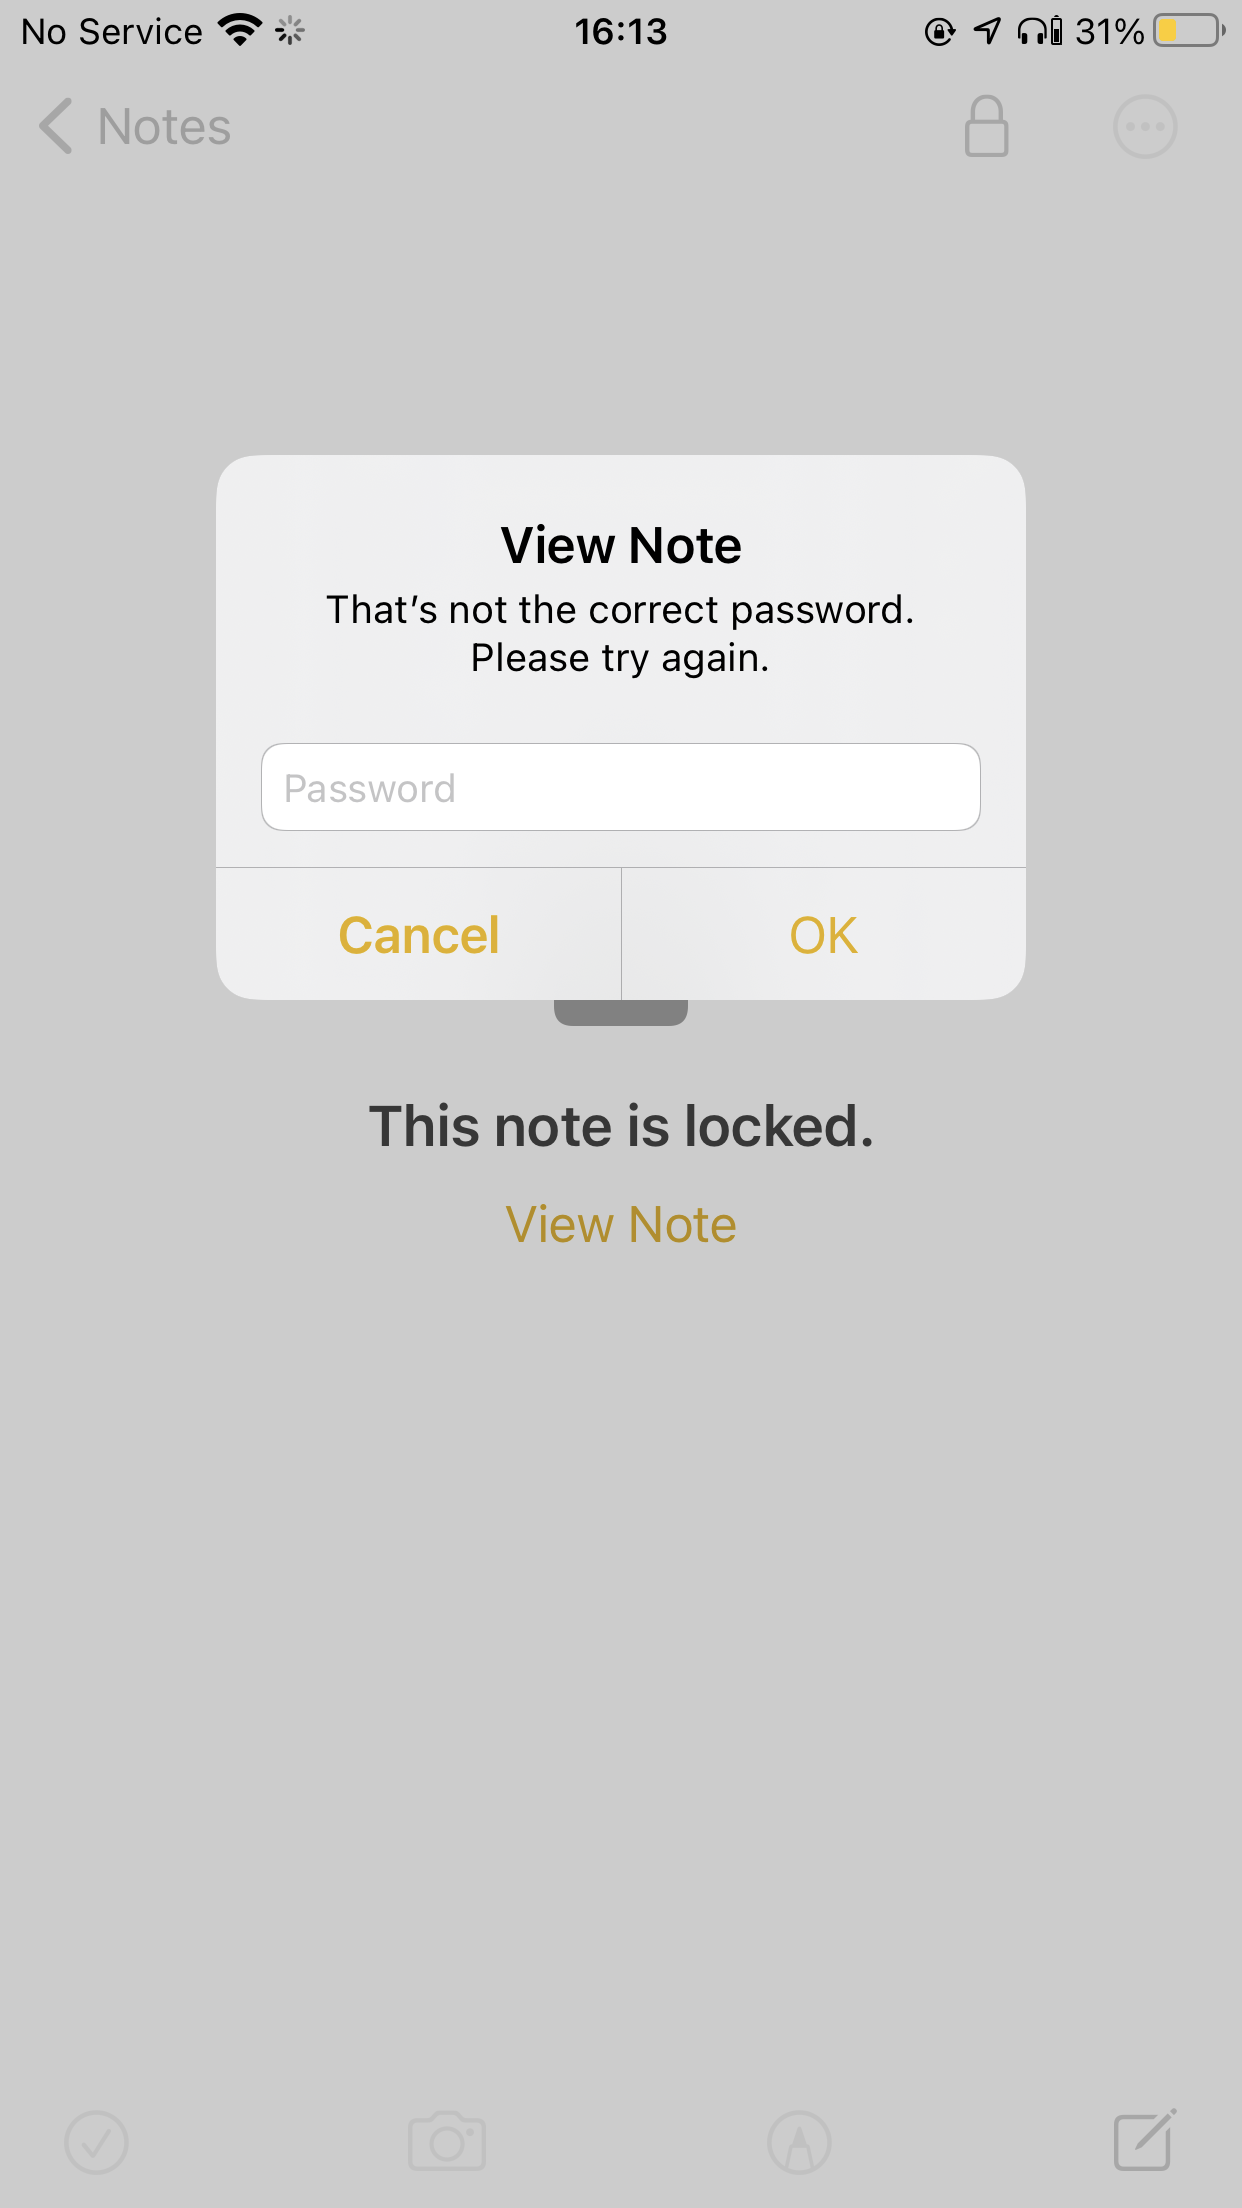 Notes says wrong password - Apple Community